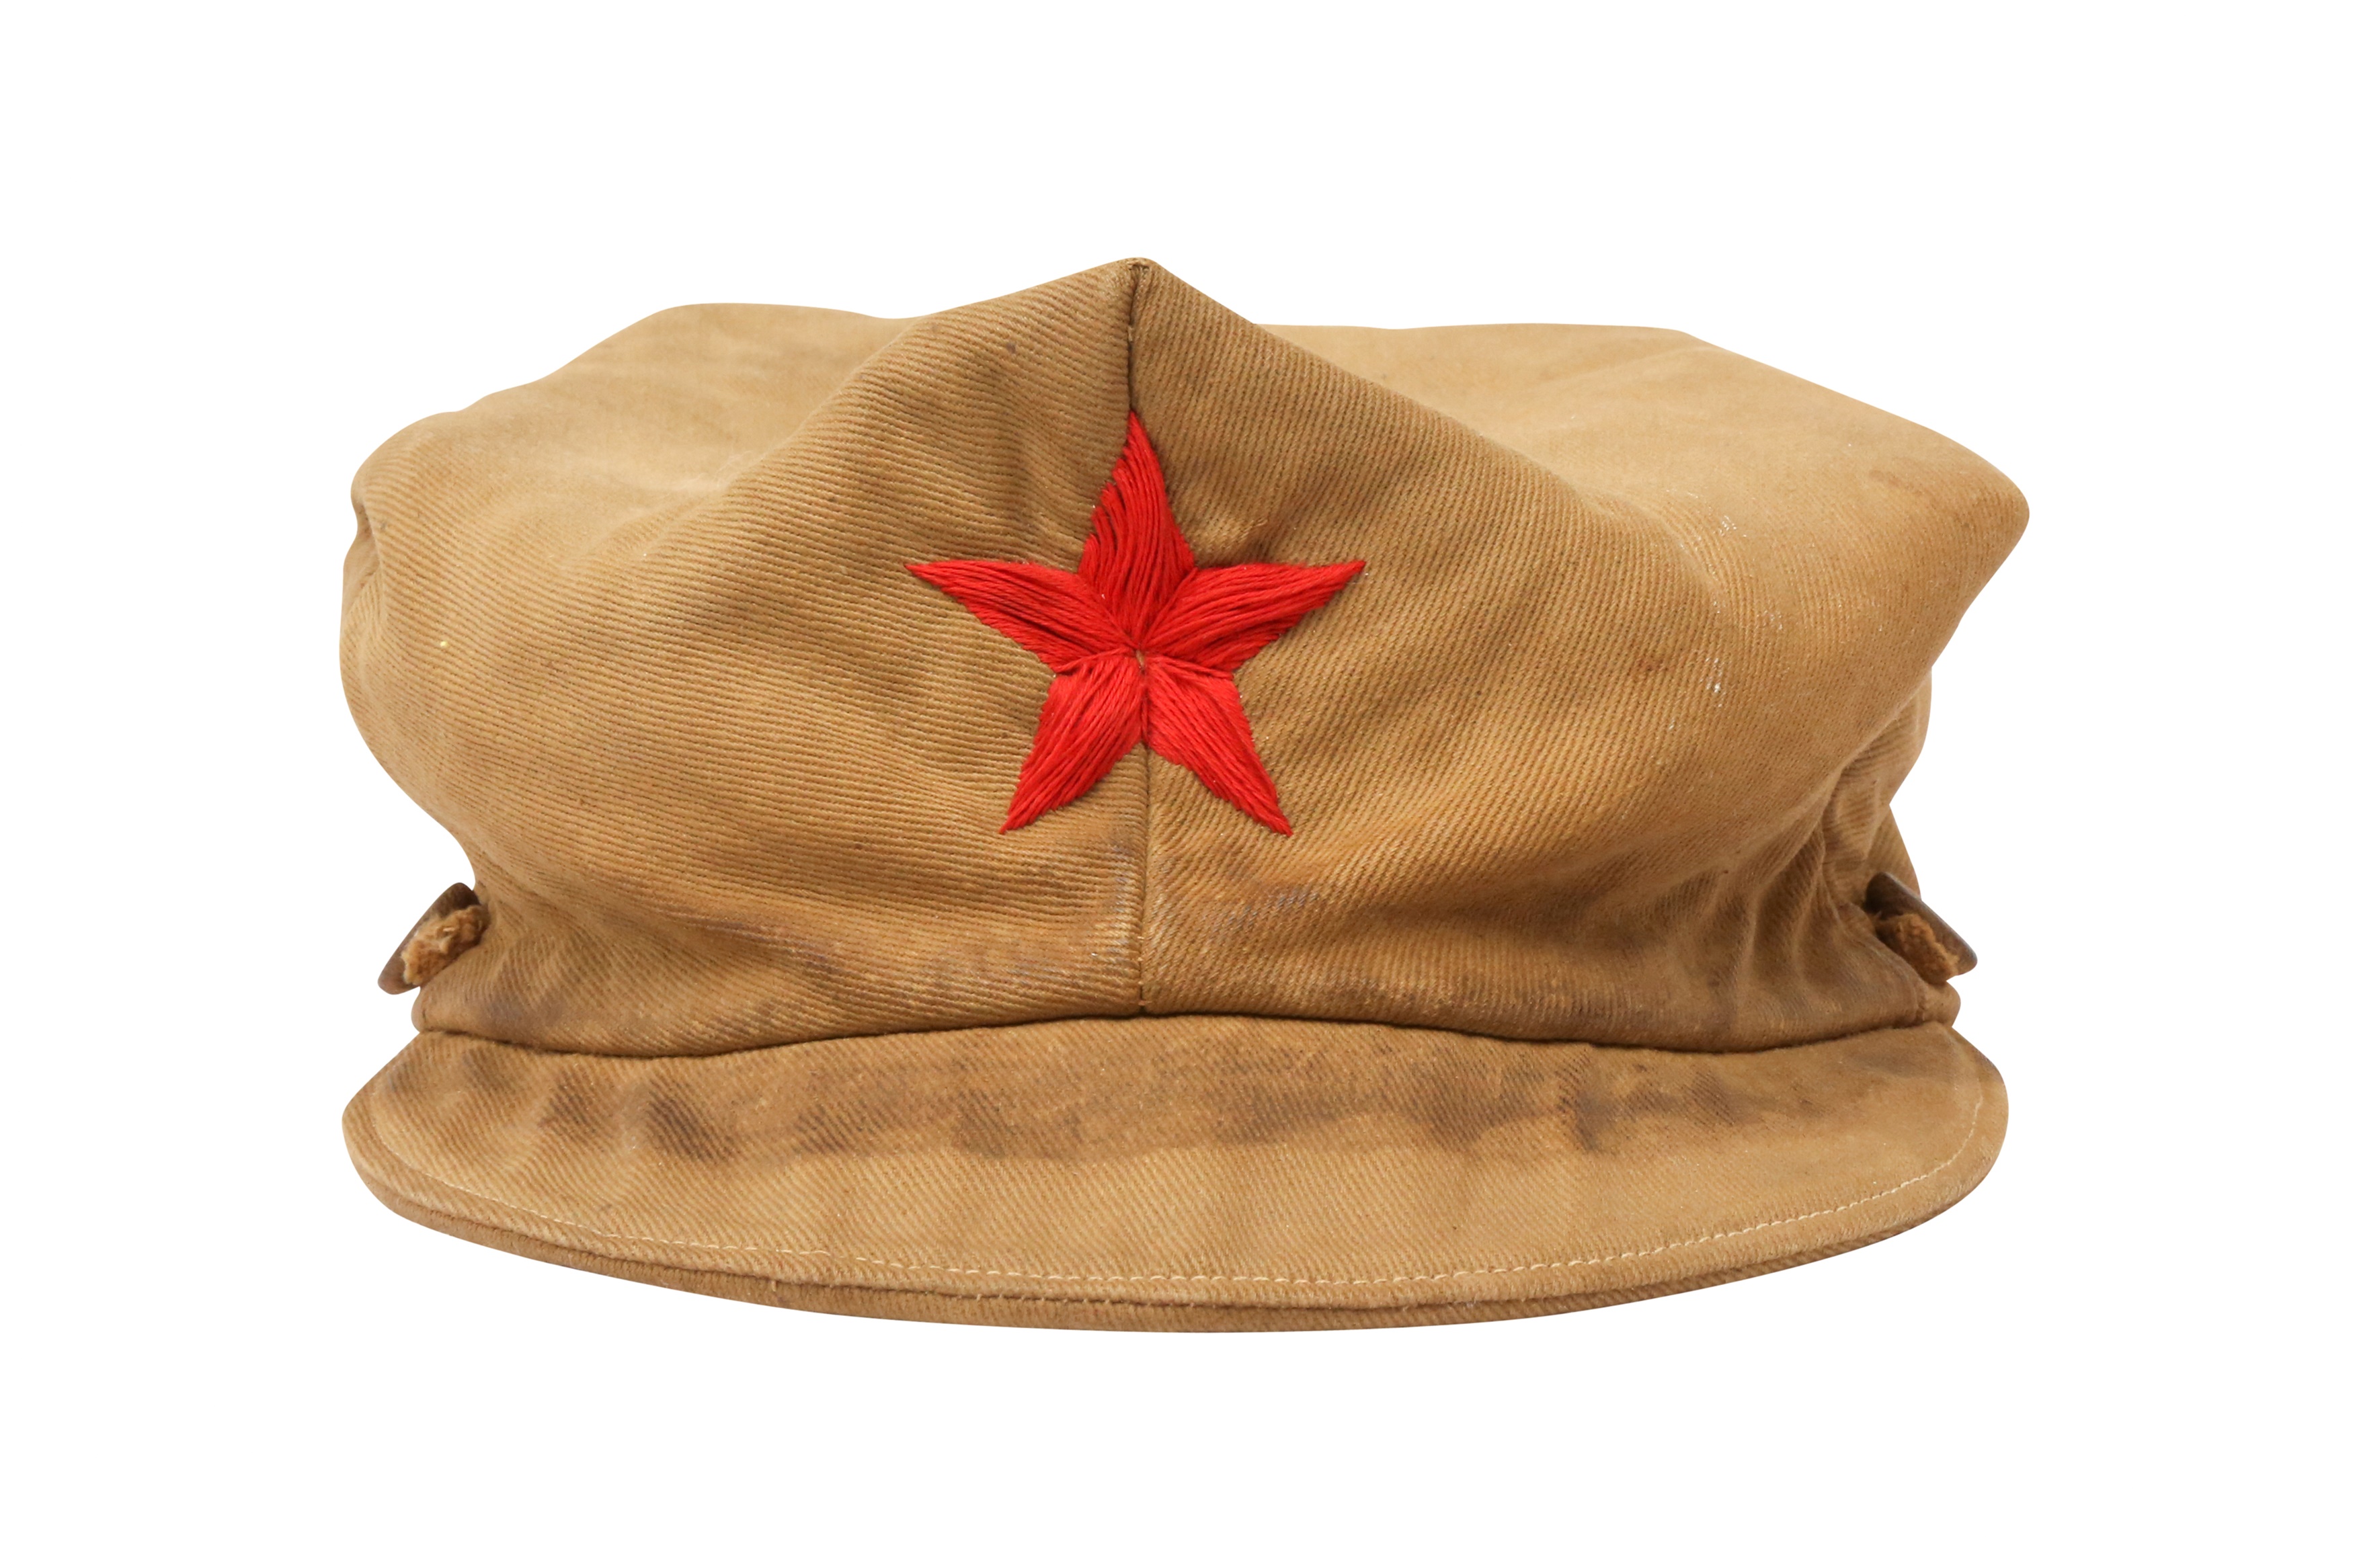 A MALAY NATIONAL LIBERATION ARMY FIELD CAP